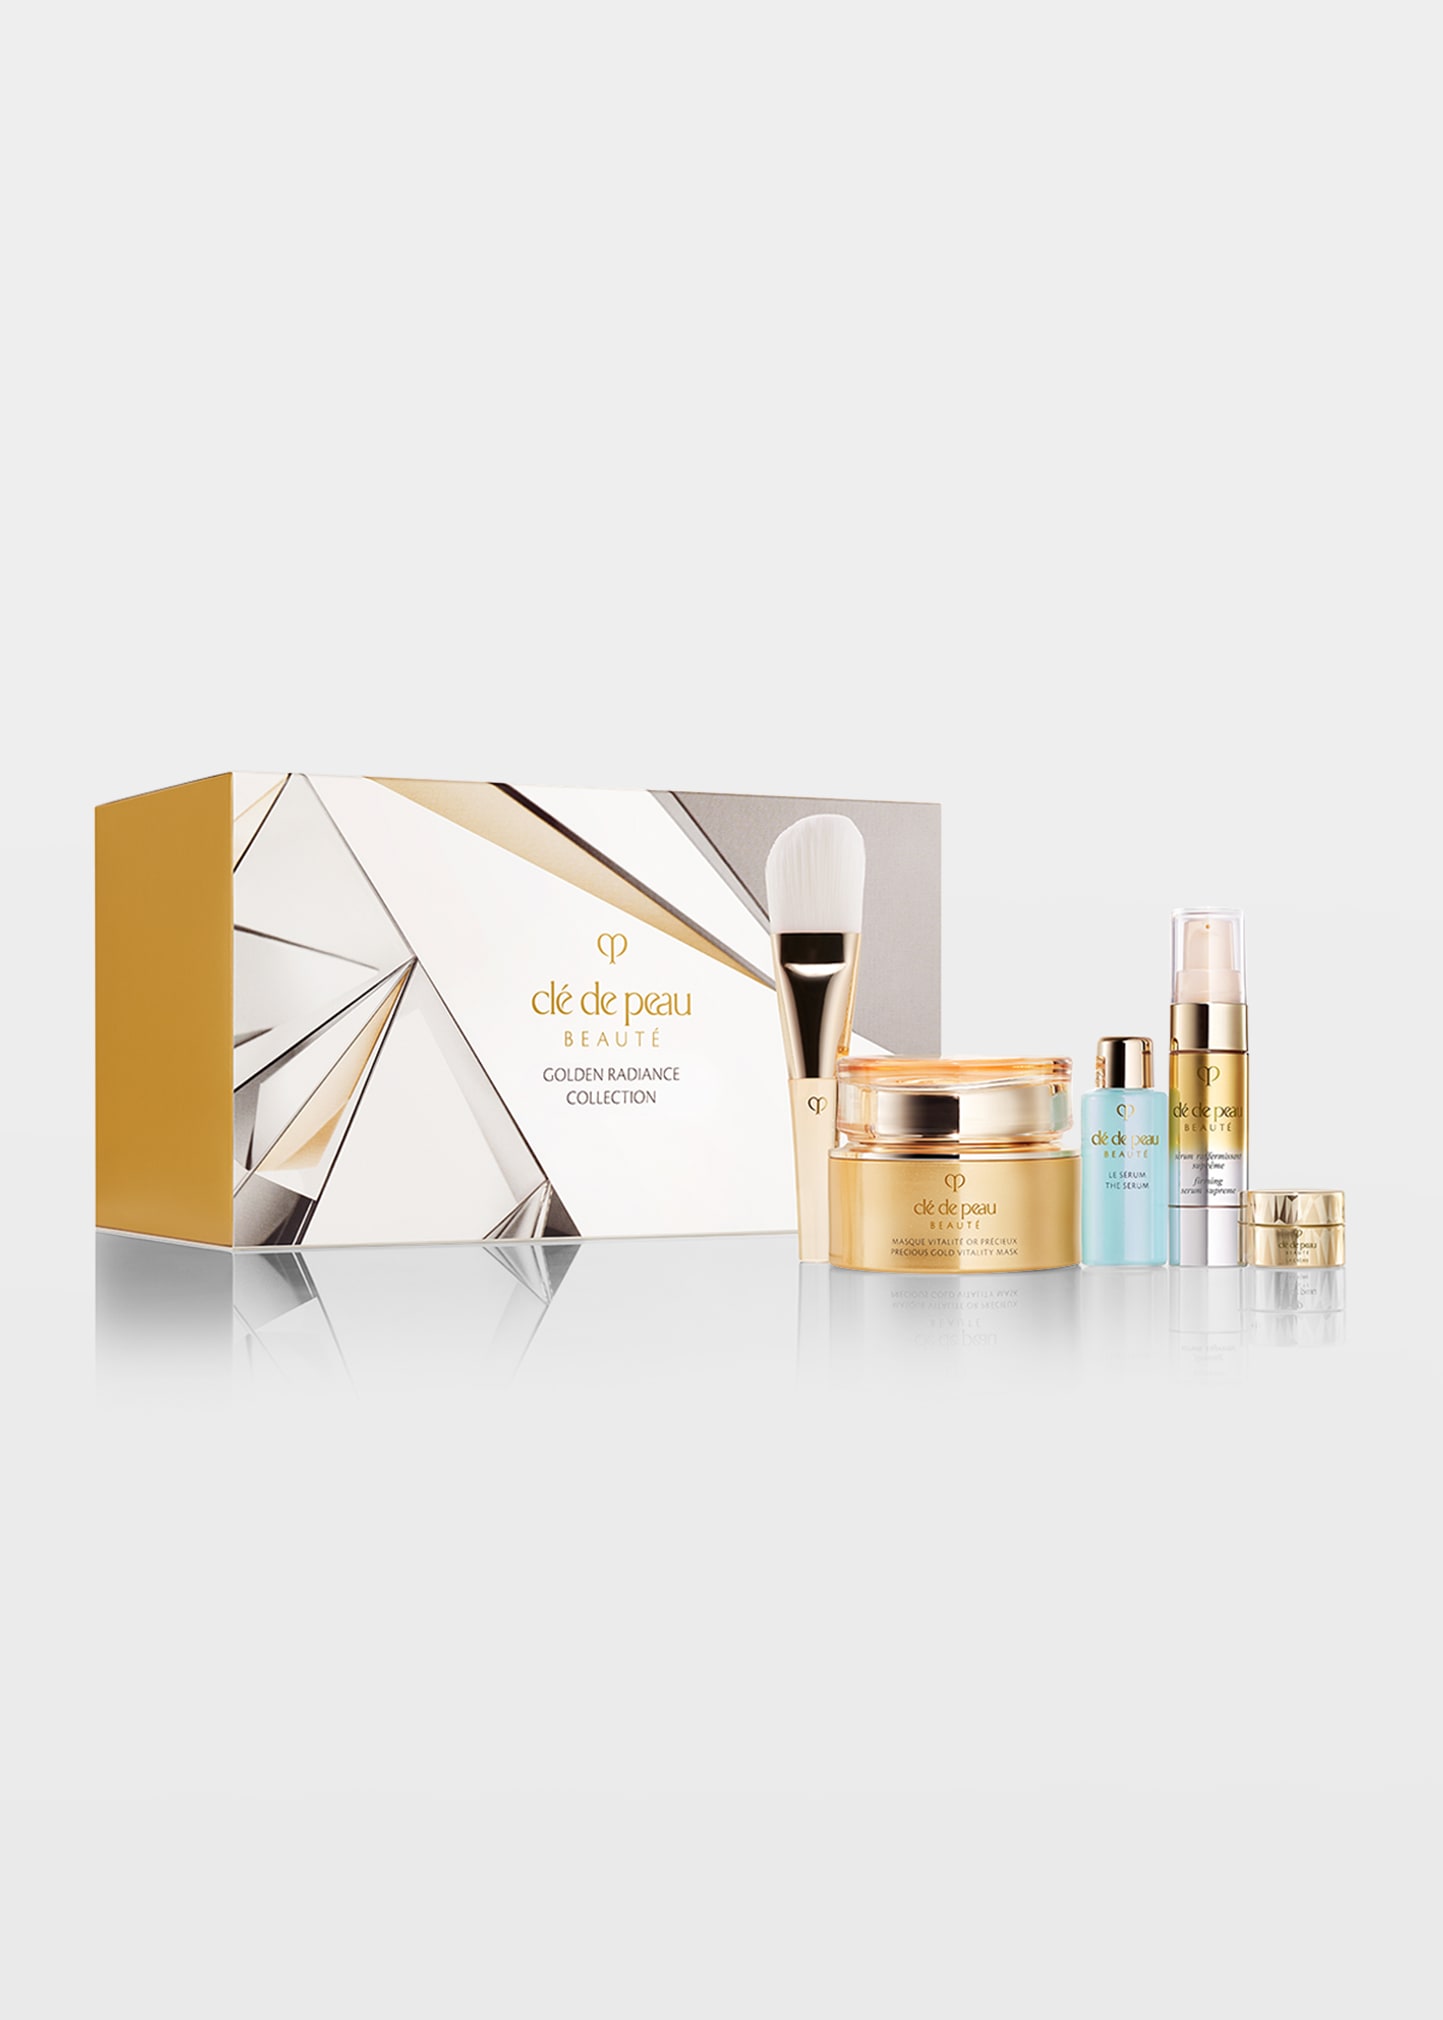 Golden Radiance Collection ($447 Value)